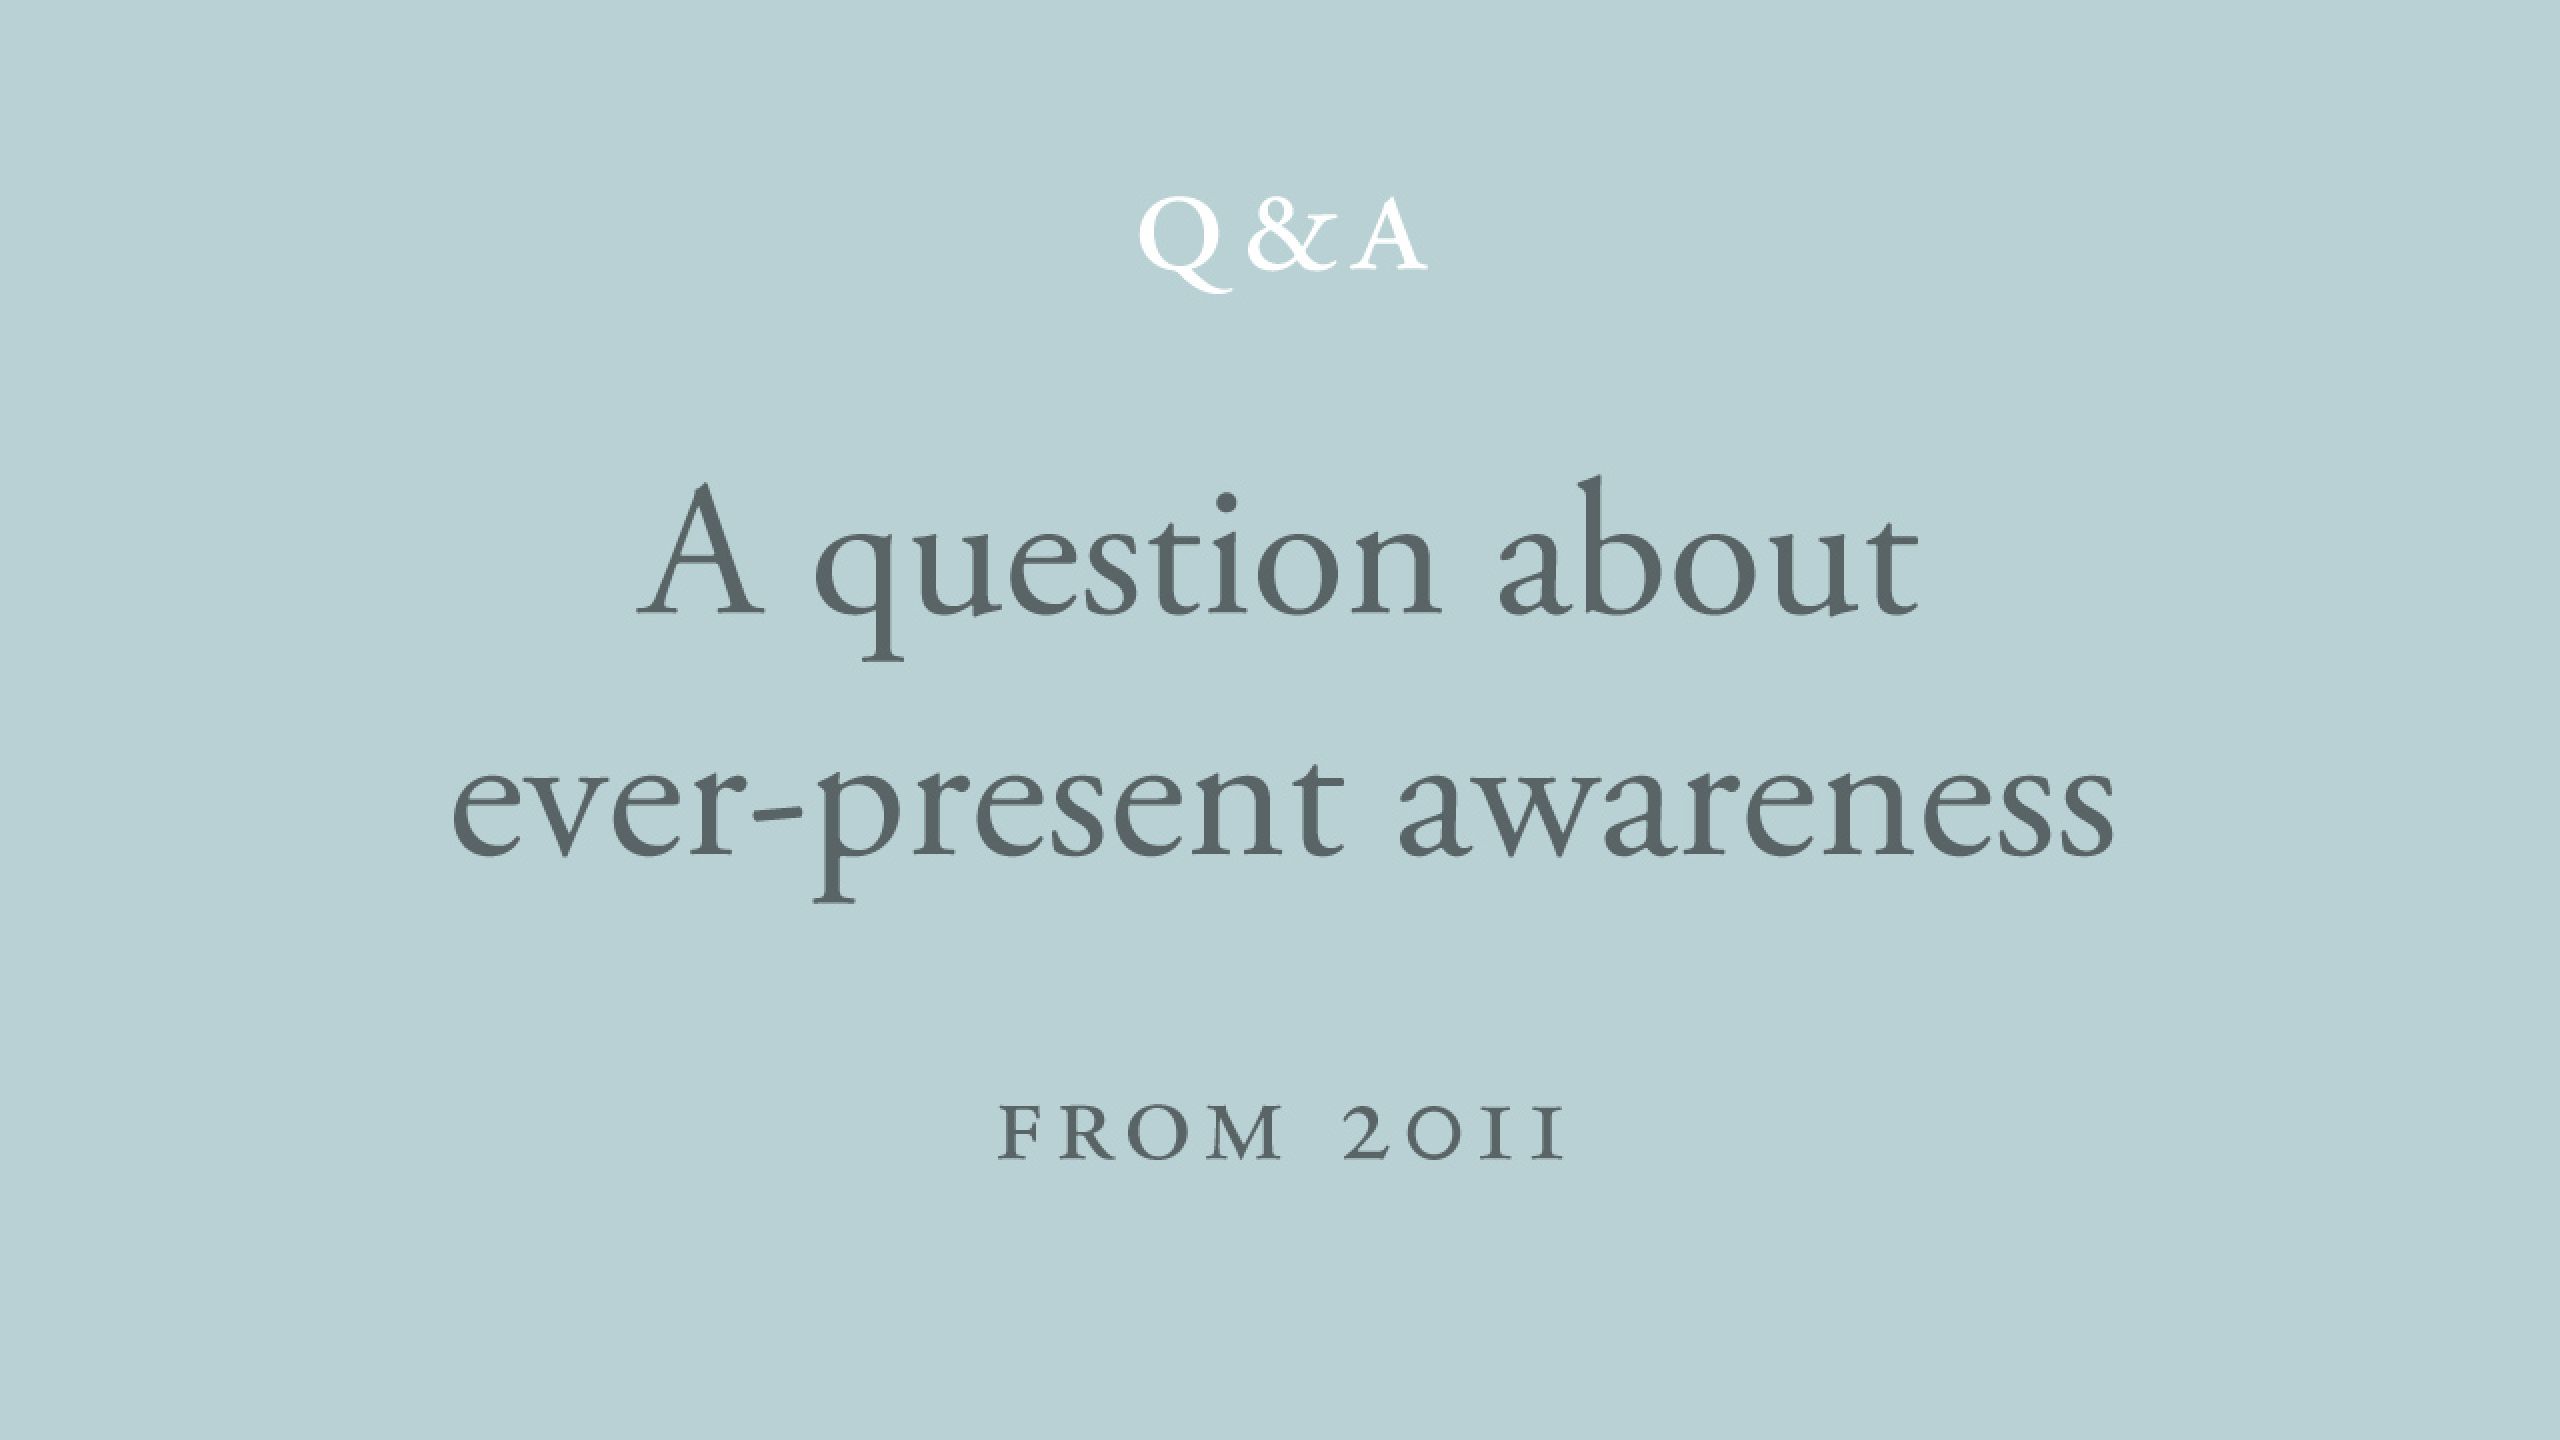 How do we know that awareness is ever-present?